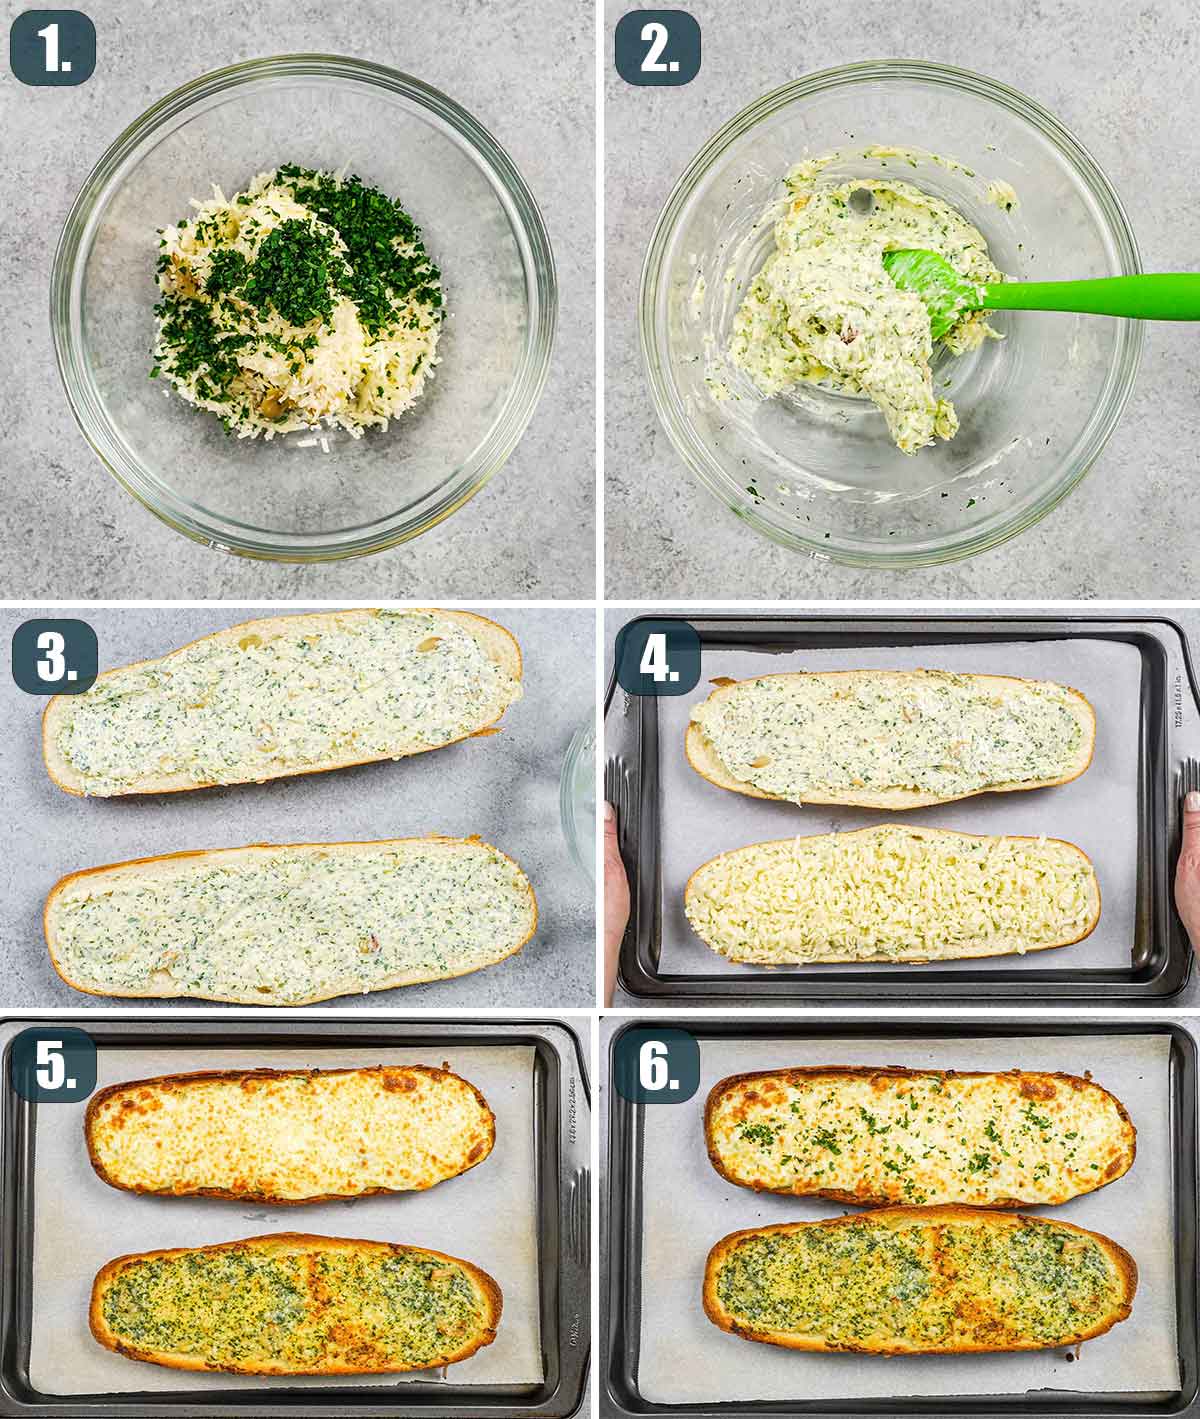 detailed process shots showing how to make garlic bread.